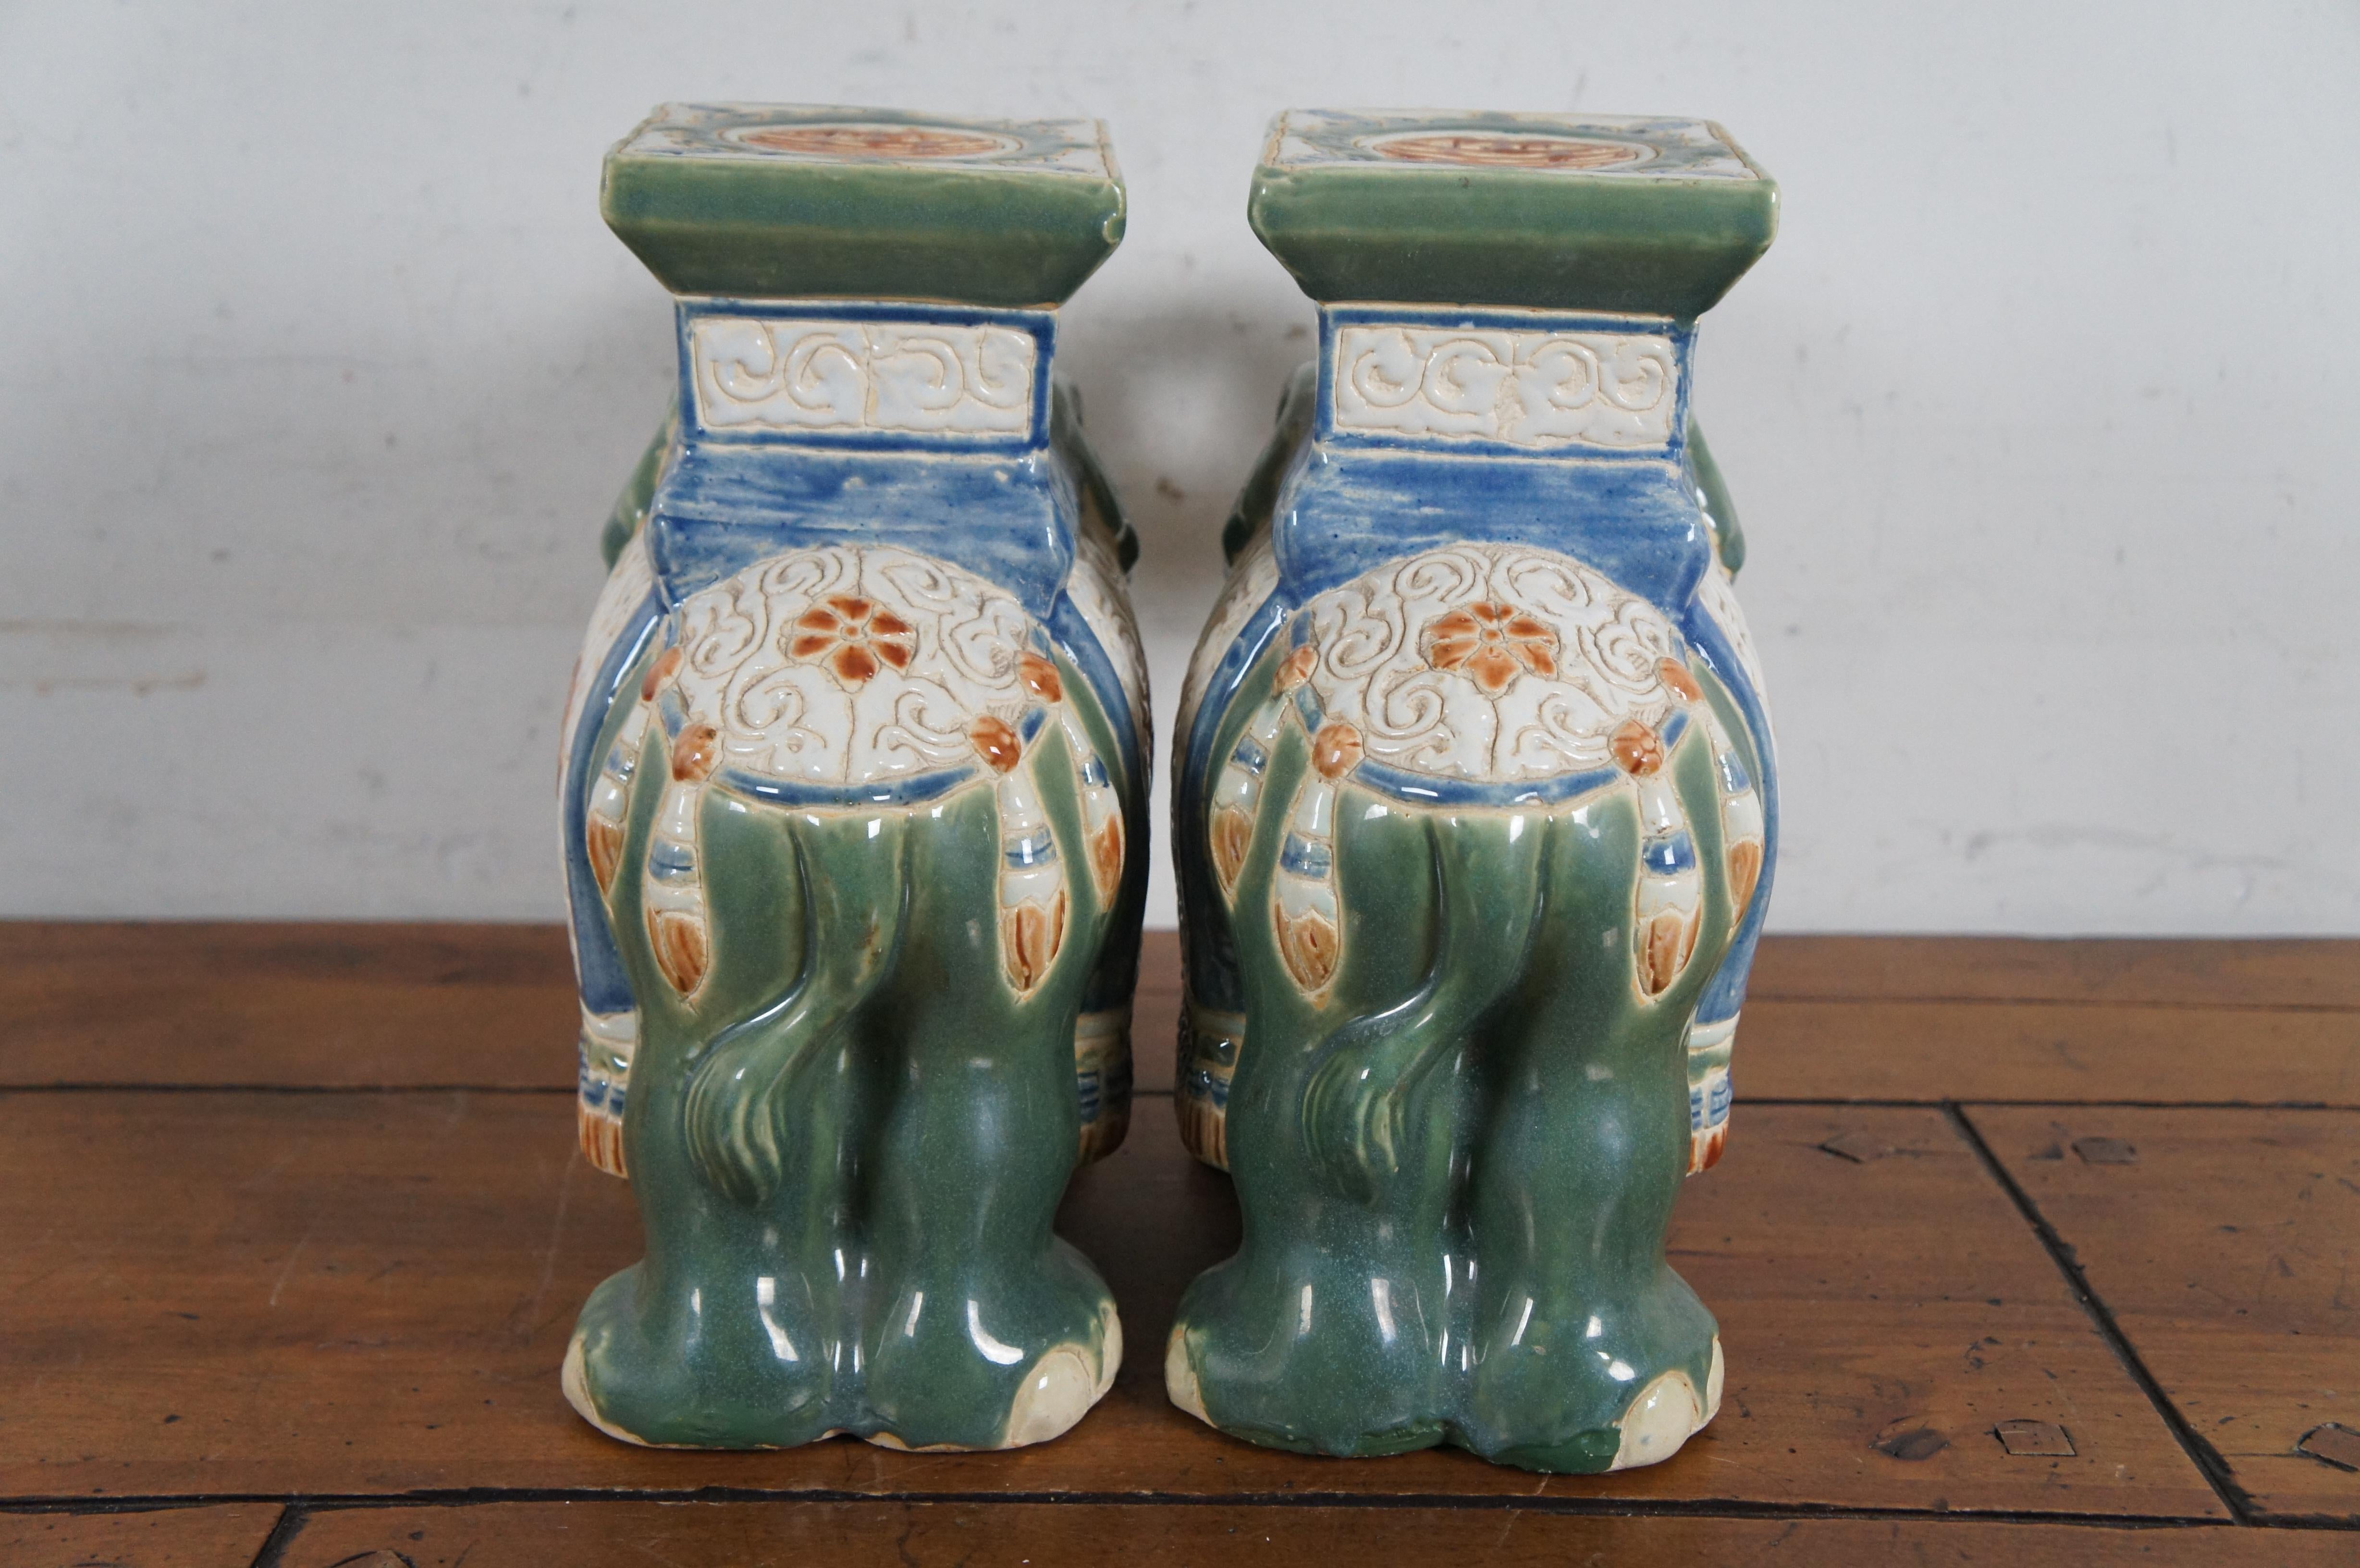 20th Century 2 Chinoiserie Polychrome Ceramic Elephant Plant Stands Garden Stools Statues